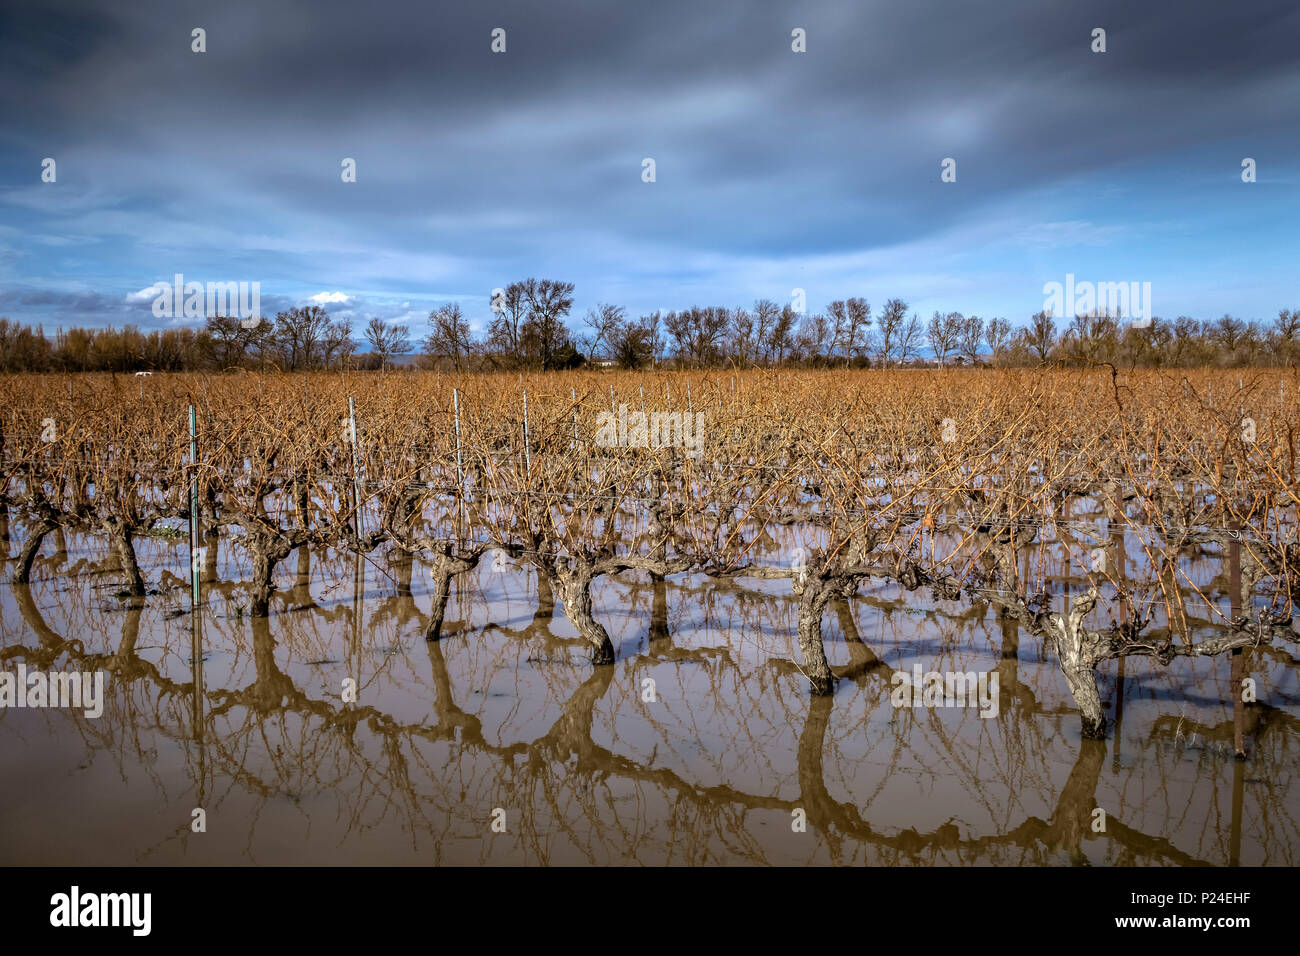 Vines under water after rainfall in winter Stock Photo